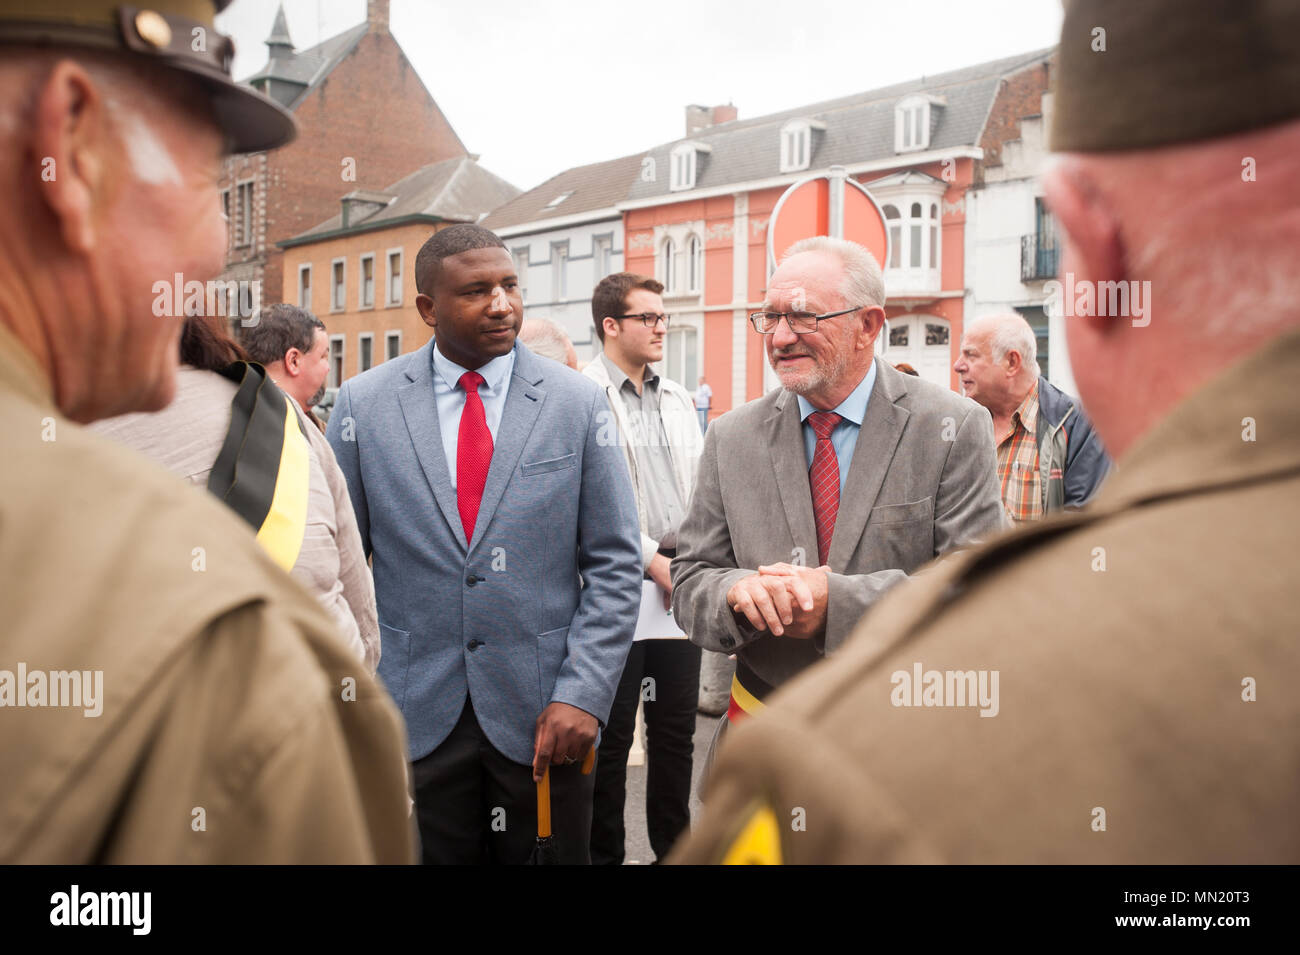 André Desmarlières, Mayor of Brugelette, Belgium speaks with attendees during the memorial ceremony for Belgian Lt. Col. Joseph Daumerie, Aug. 15, 2017, Brugelette, Belgium. The memorial commemorates the 75th anniversary of Daumerie's death. Daumerie is a war hero and fighter pilot who was executed in 1942 during World War II. The event offered a unique opportunity for the U.S. service members to honor a fallen hero and strengthen their relationship with NATO allies during the U.S. Army Garrison Benelux's 50th anniversary in Belgium. (U.S. Navy Photo by Information System Technician Seaman Dan Stock Photo